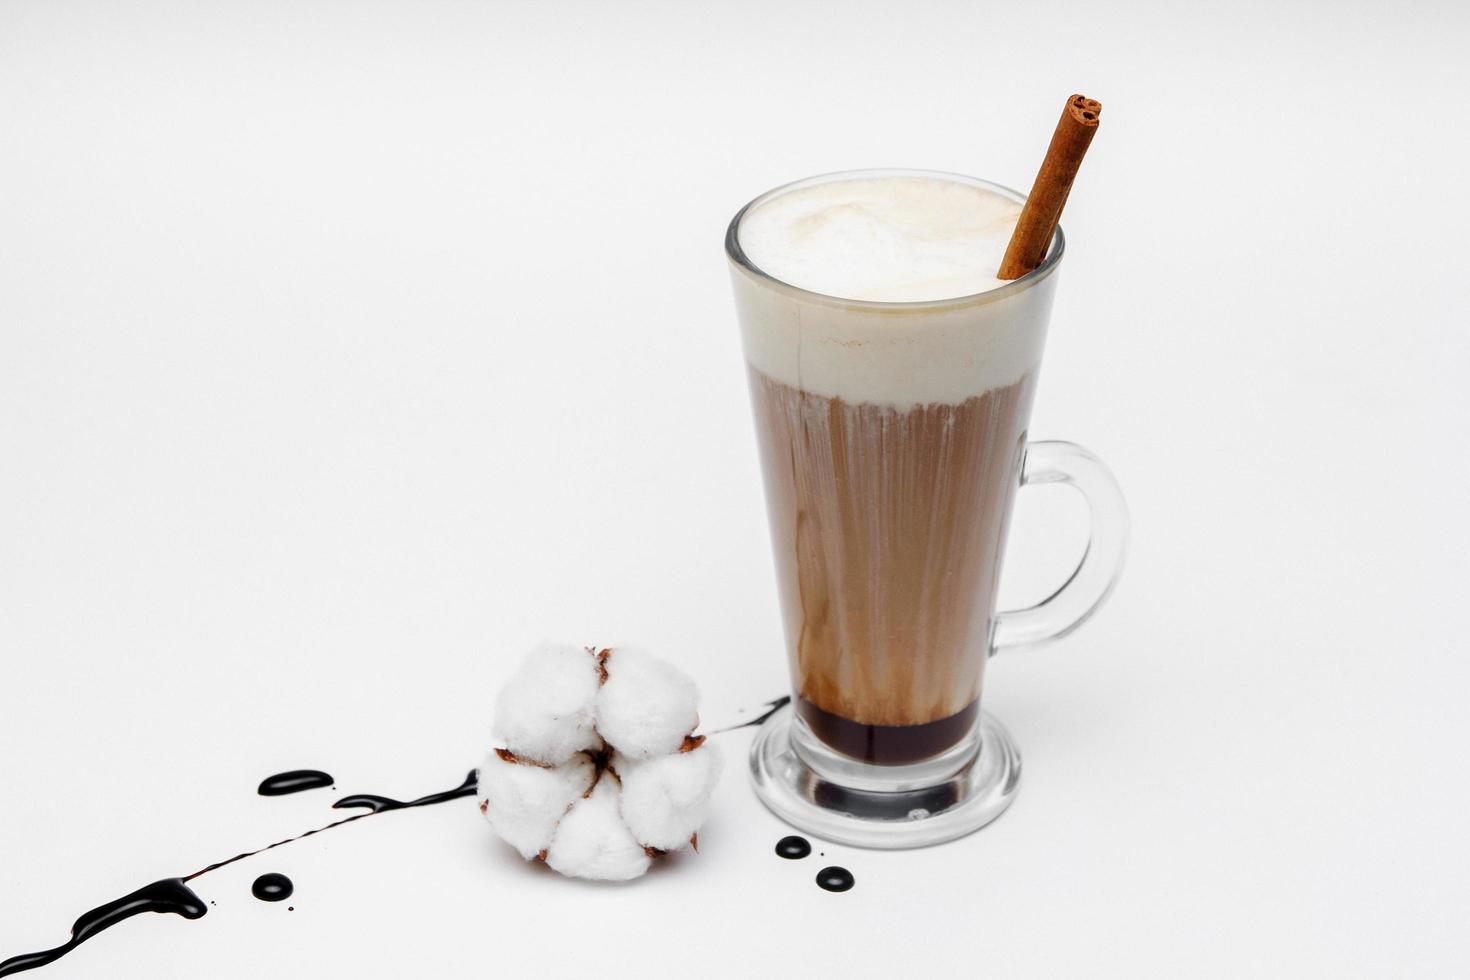 Coffee cappuccino with cinnamon and anise stars on white background photo